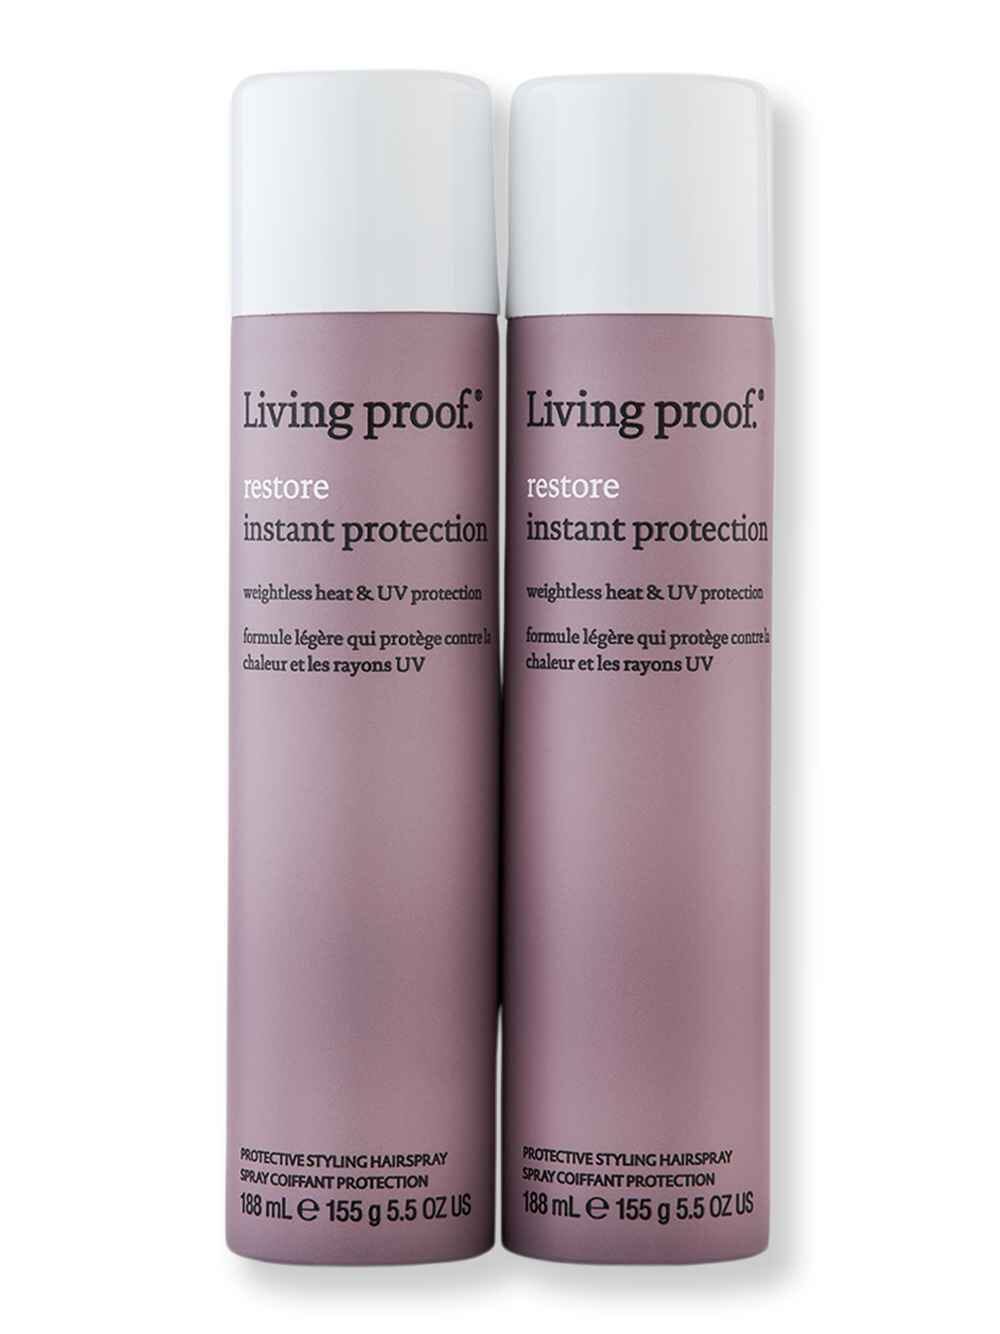 Living Proof Living Proof Restore Instant Protection Hairspray 2 Ct Hair Sprays 